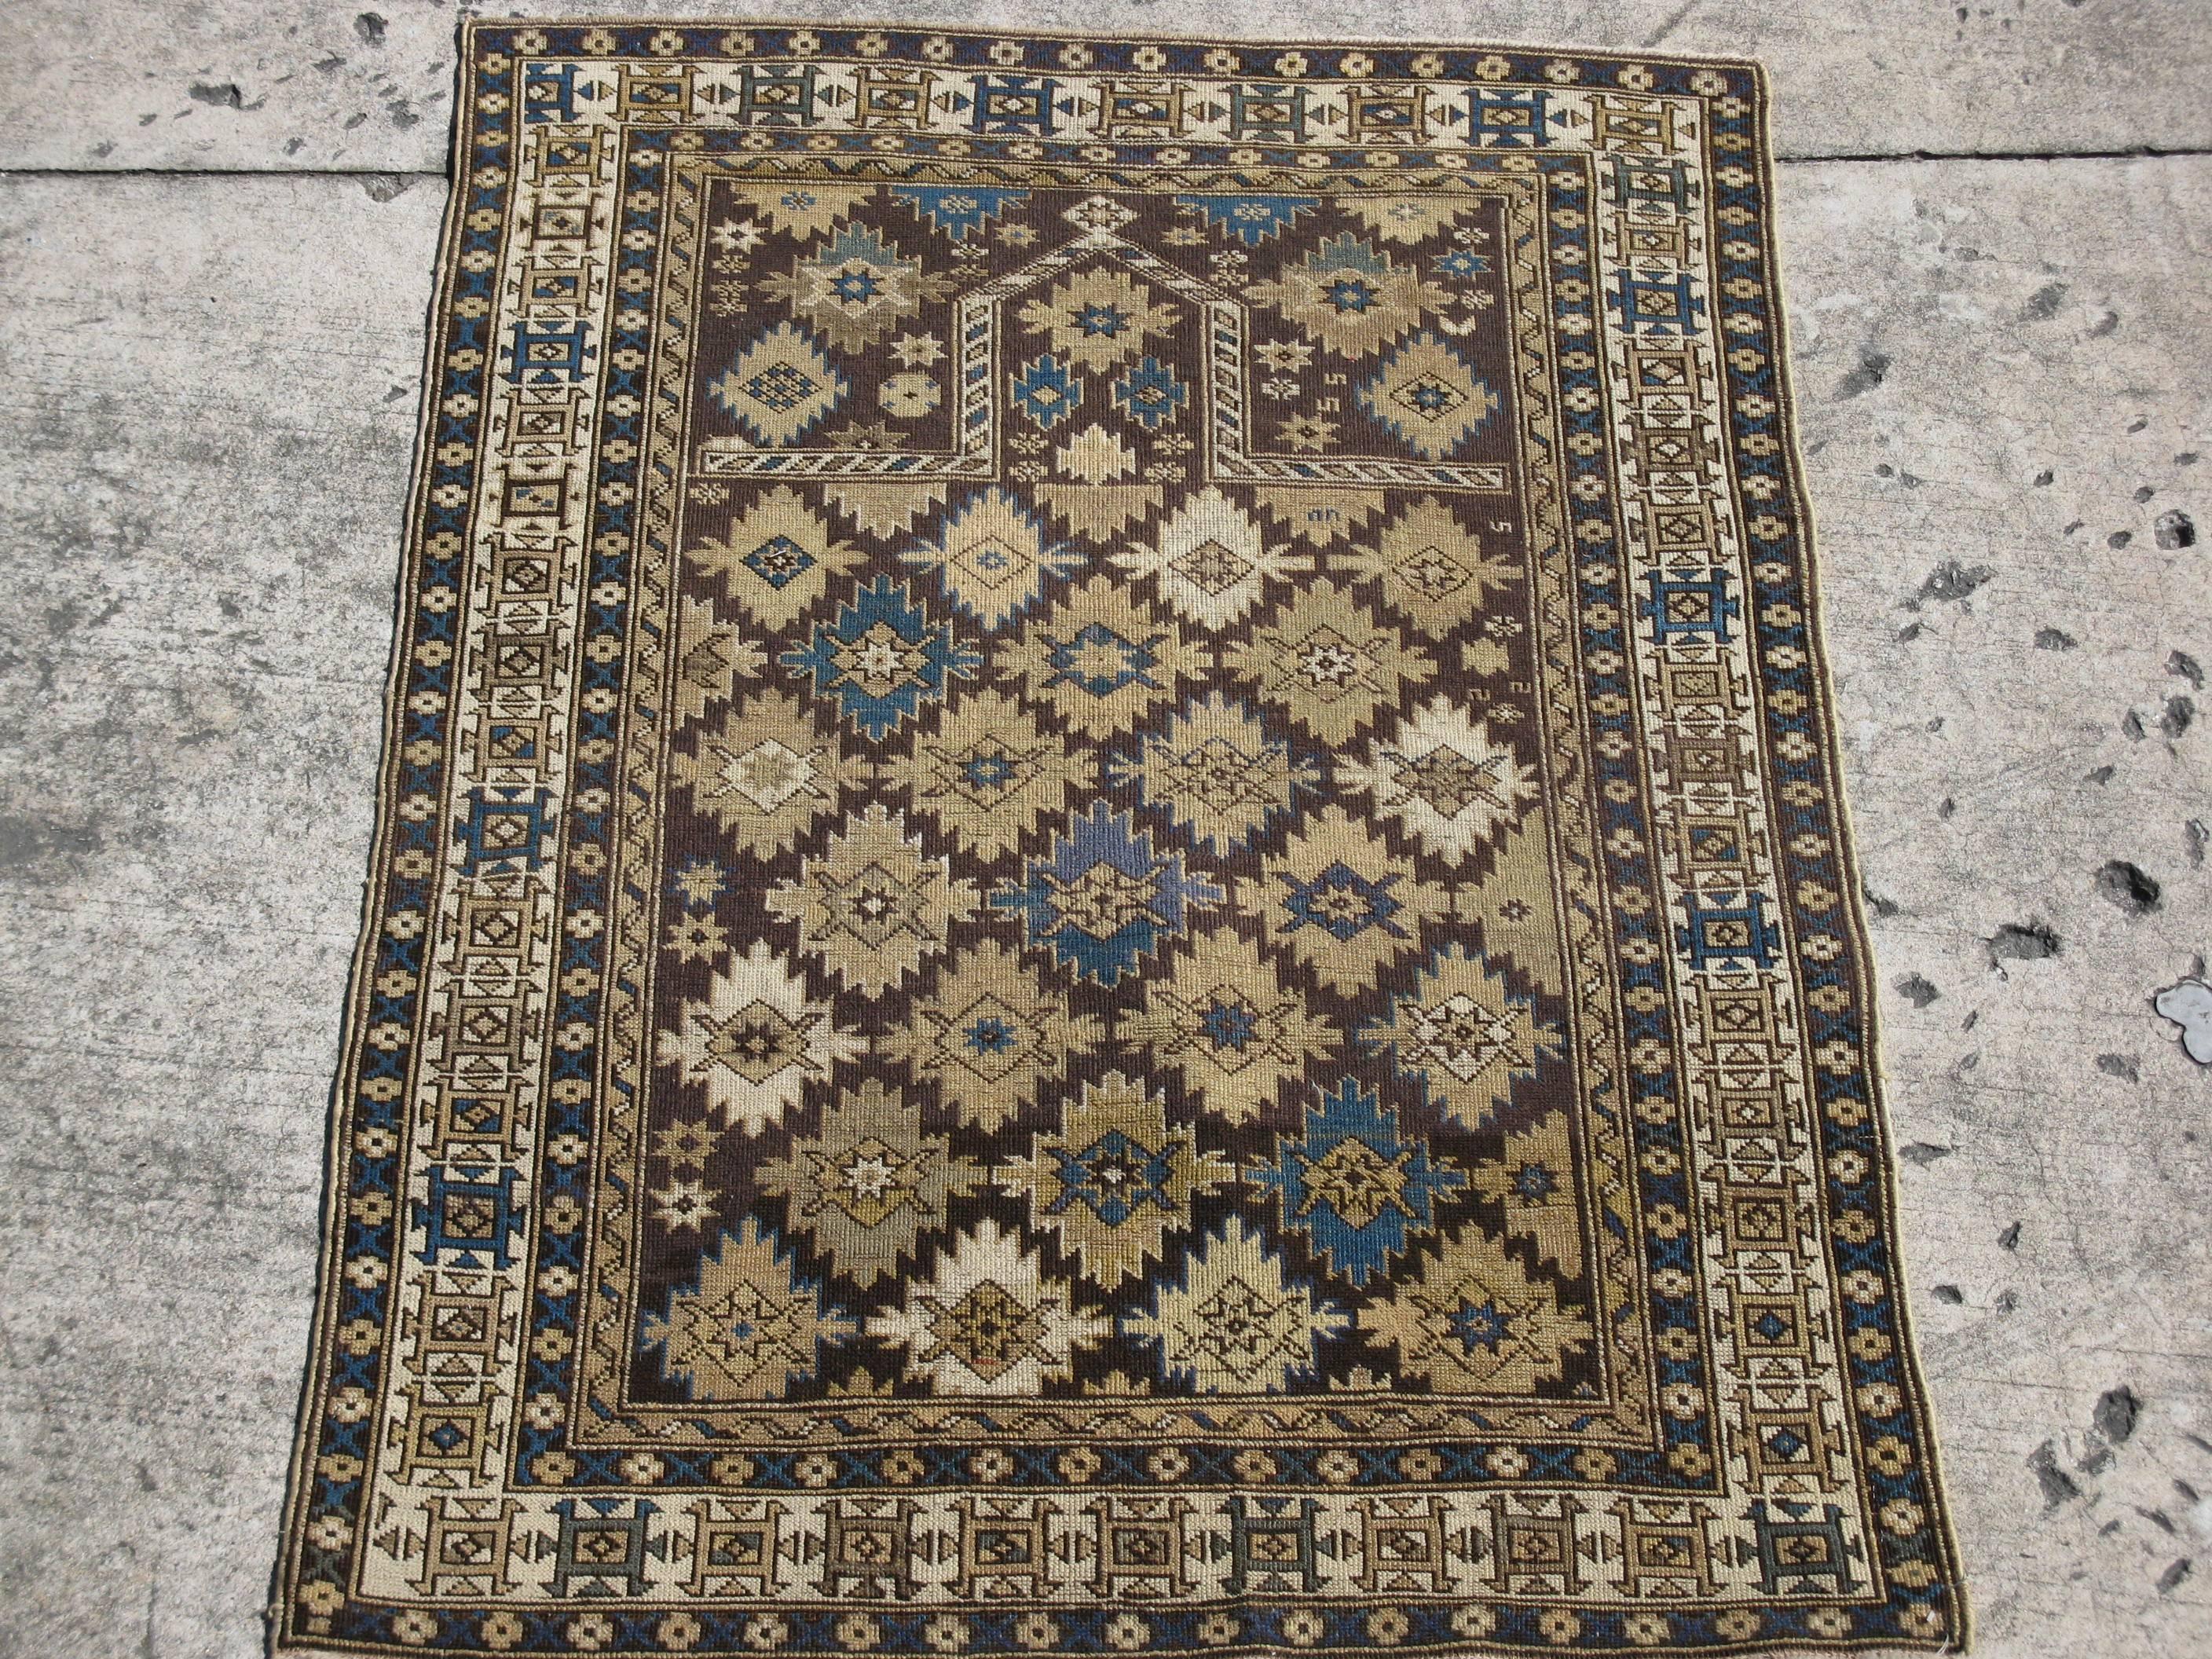 This is an antique hand knotted Caucasian Kazak rug. It has a geometric Mehrab design with a repetitive all-over pattern in all natural earth tone colors.
It is a beautiful rug to hang or use on the floor. It measures 3' 10'' x 5' 4''.